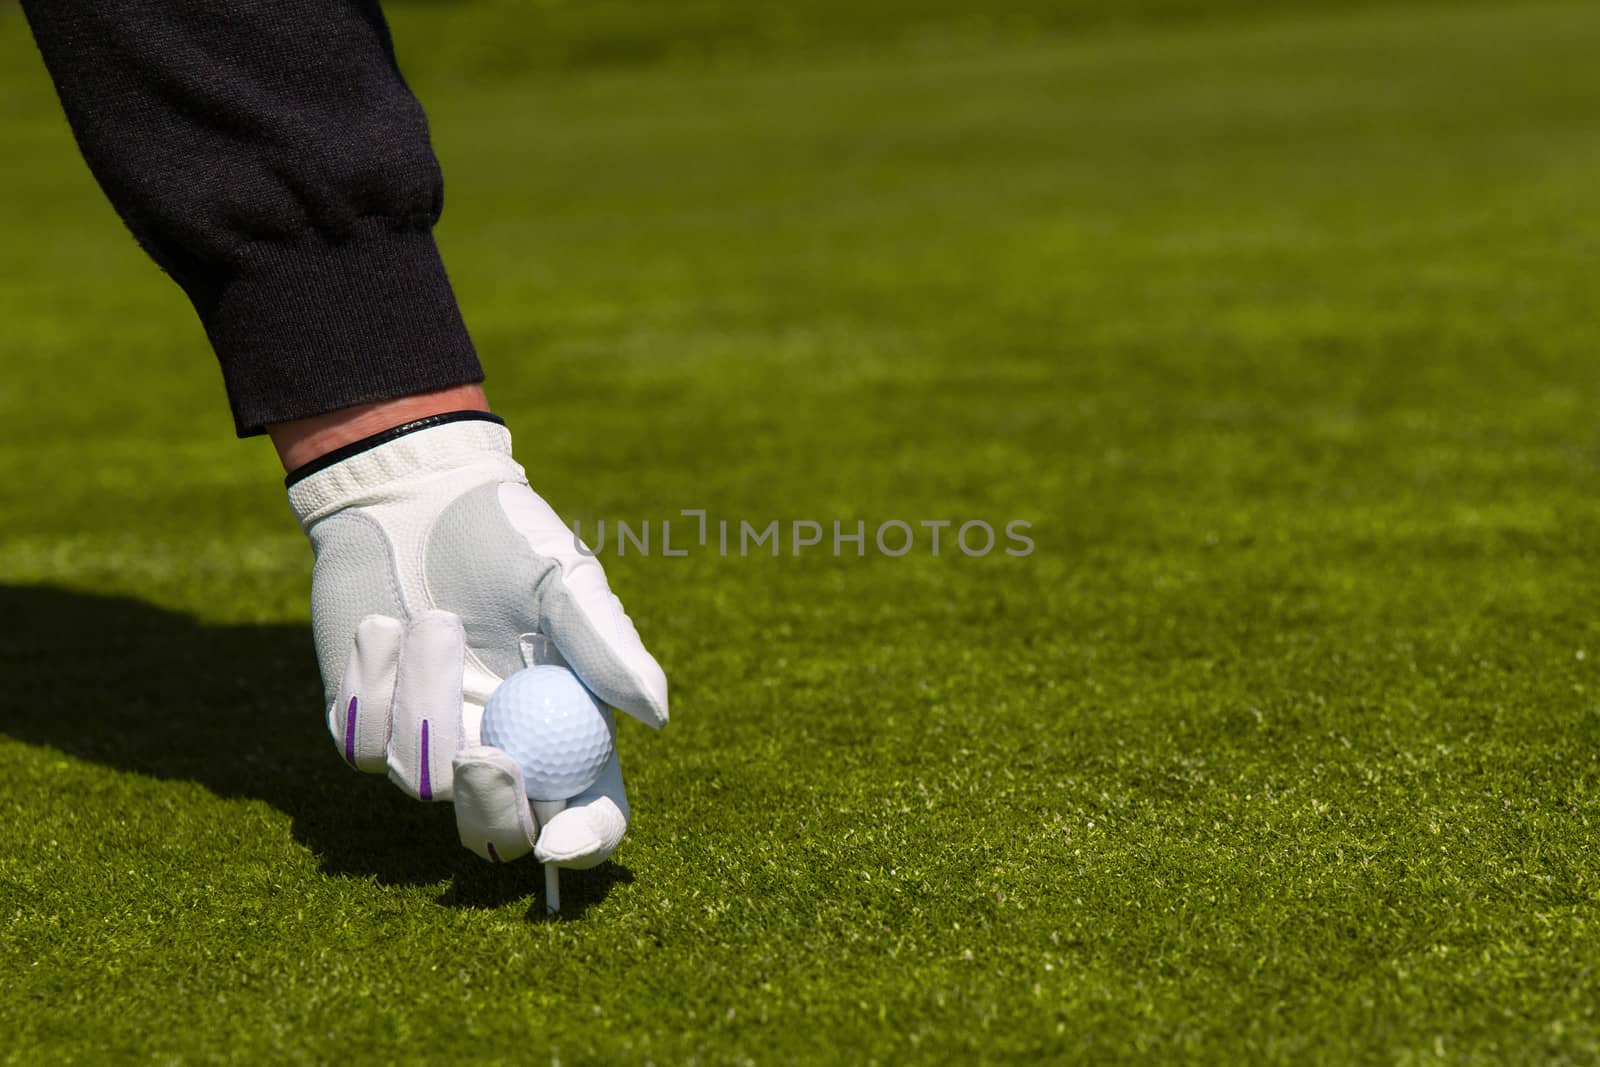 A close up of a golfer with a white glove placing a ball on a tee 